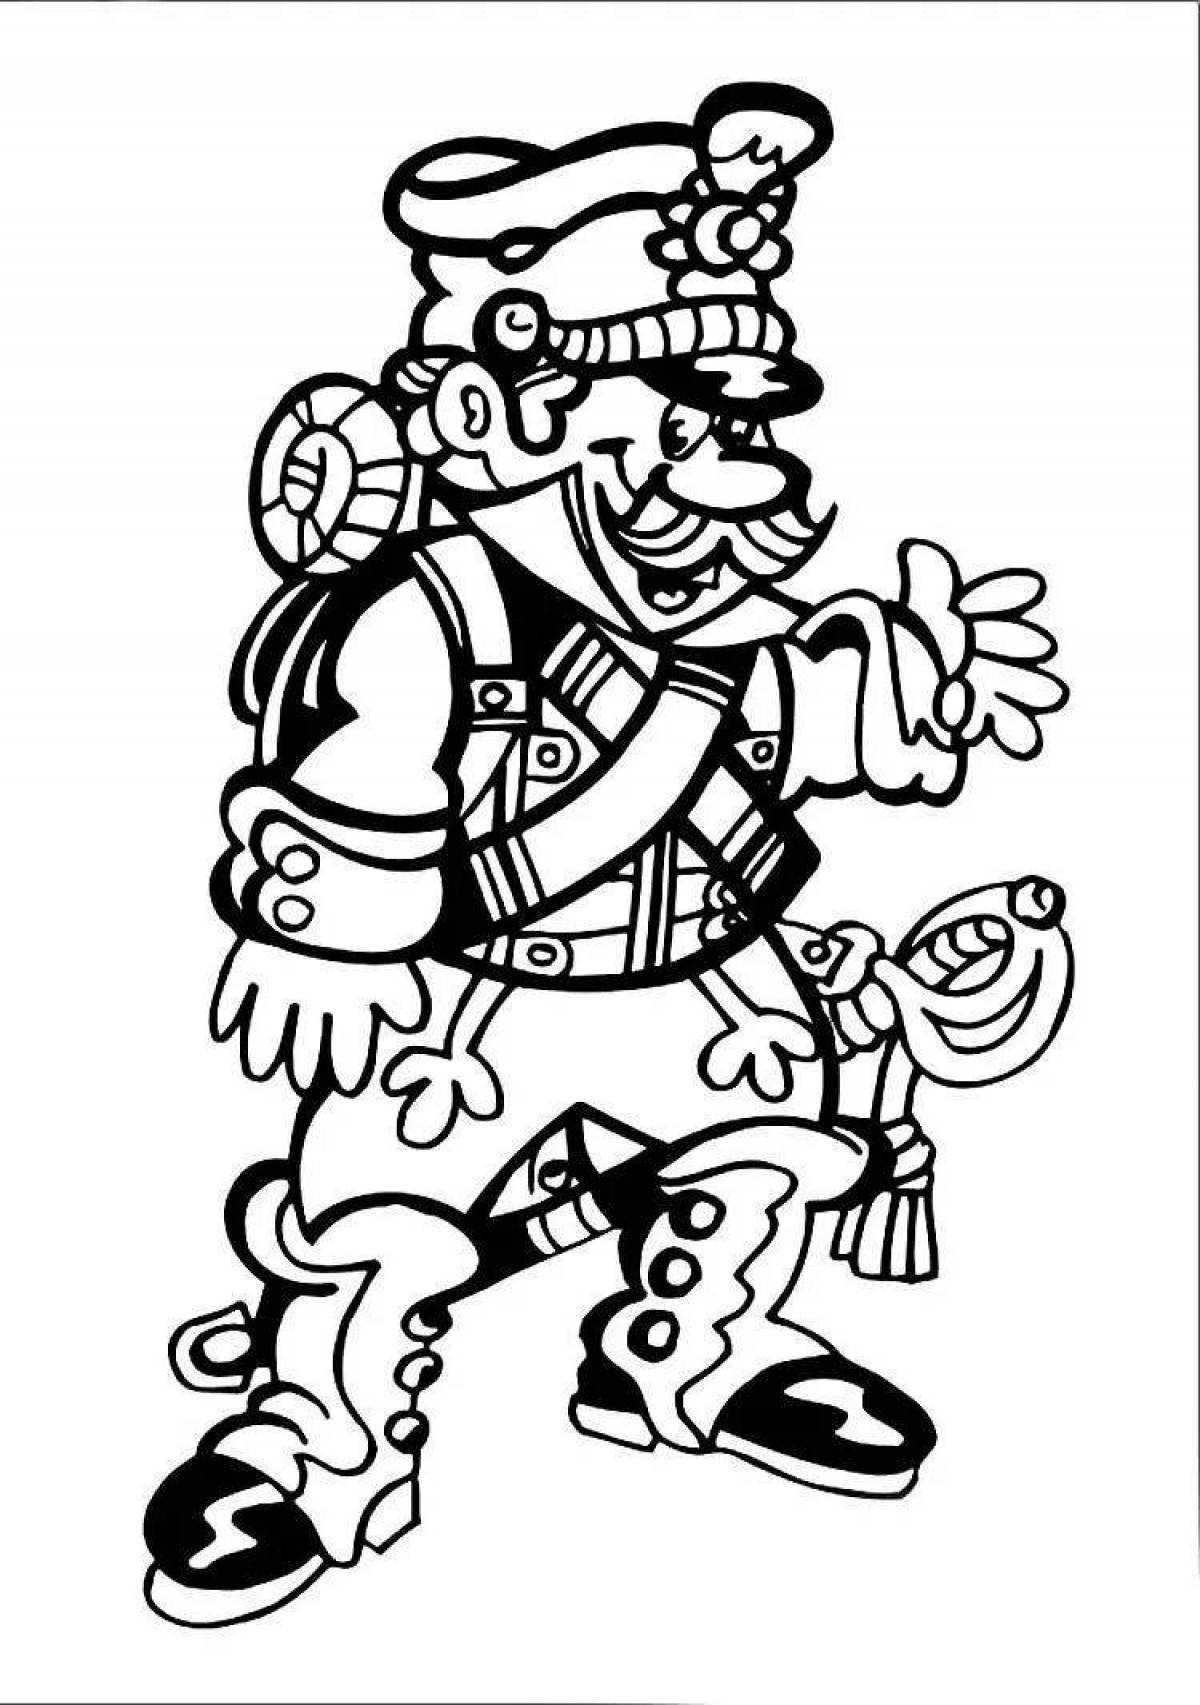 Coloring page charming flint